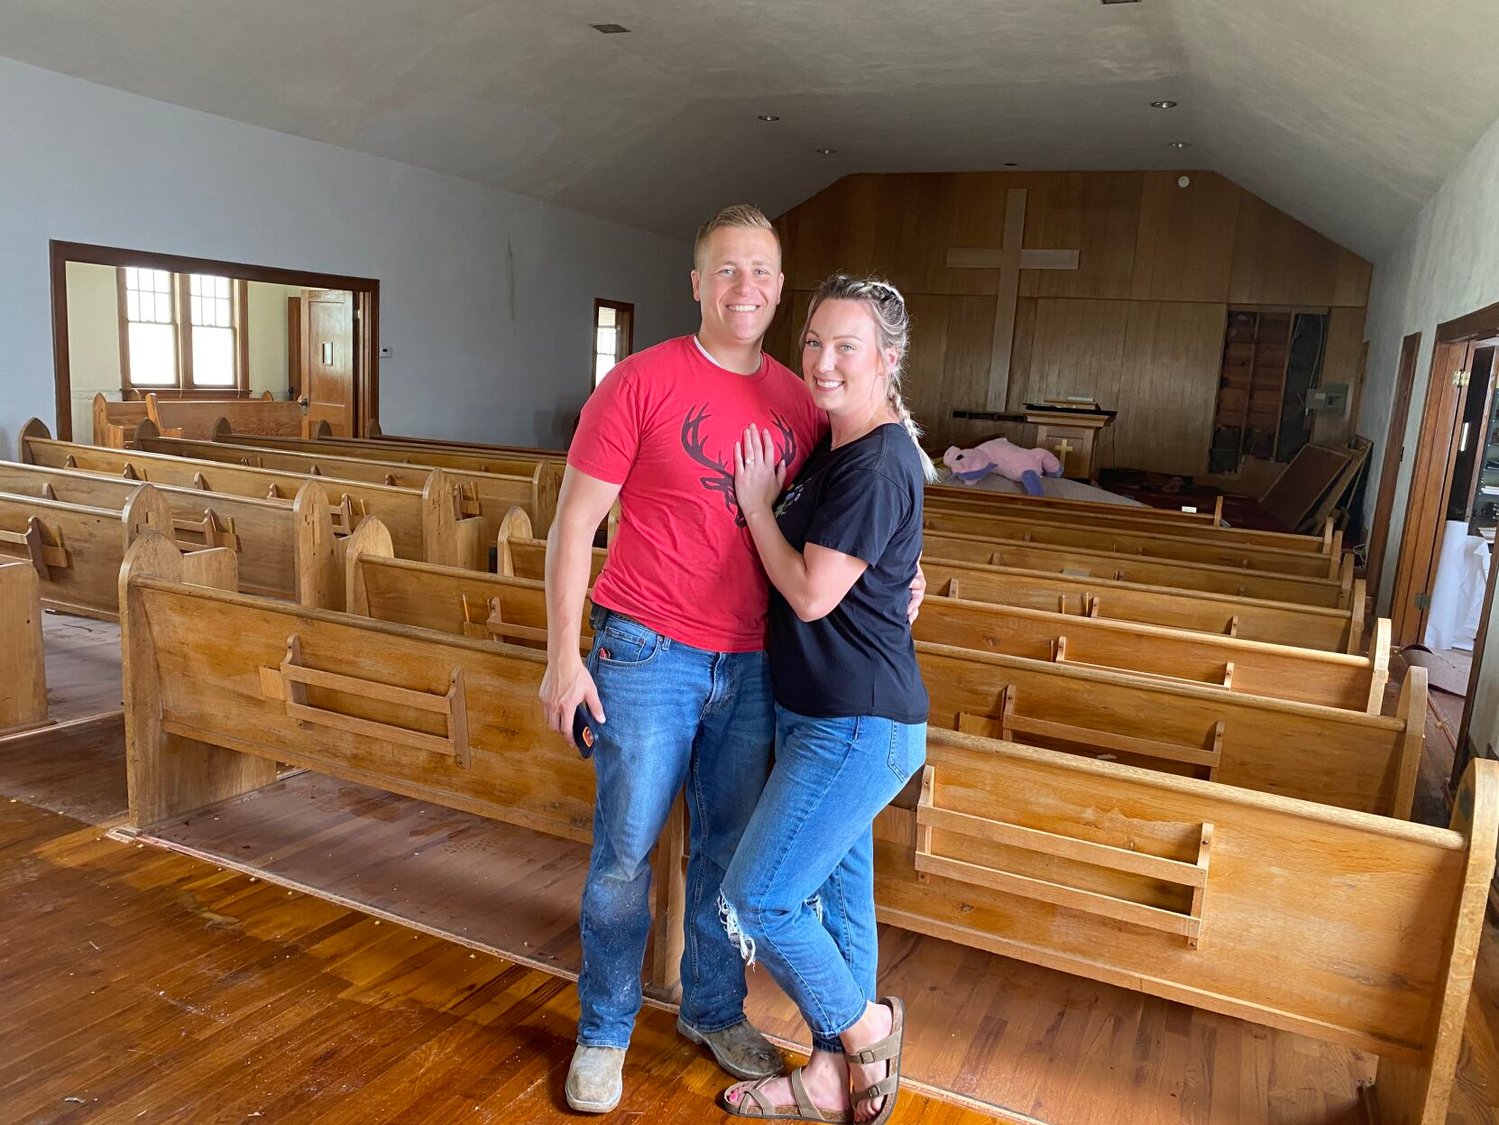 Josh Morley (left) and Danae Wheeler (right) pictured in the sanctuary of their new home.  The couple plans to leave the sanctuary as a sanctuary space which will double as a formal living room. Sharing the upper level of the home will be the kids’ bedrooms and a master bedroom with a bathroom.